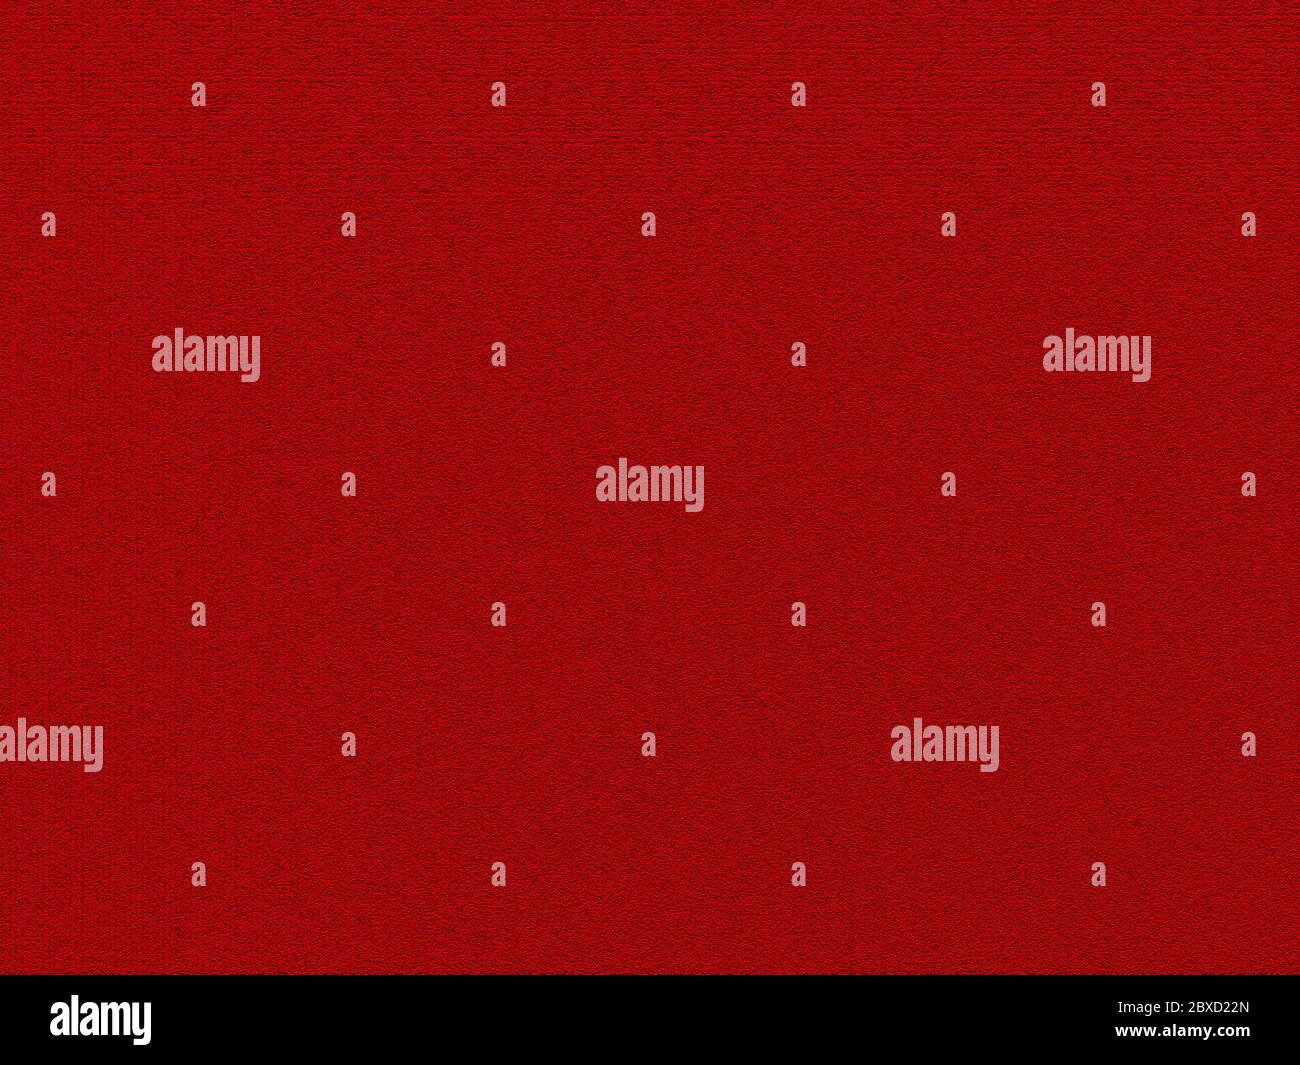 Abstract advertising red horizontal background, textured effect, decorative pattern Stock Photo